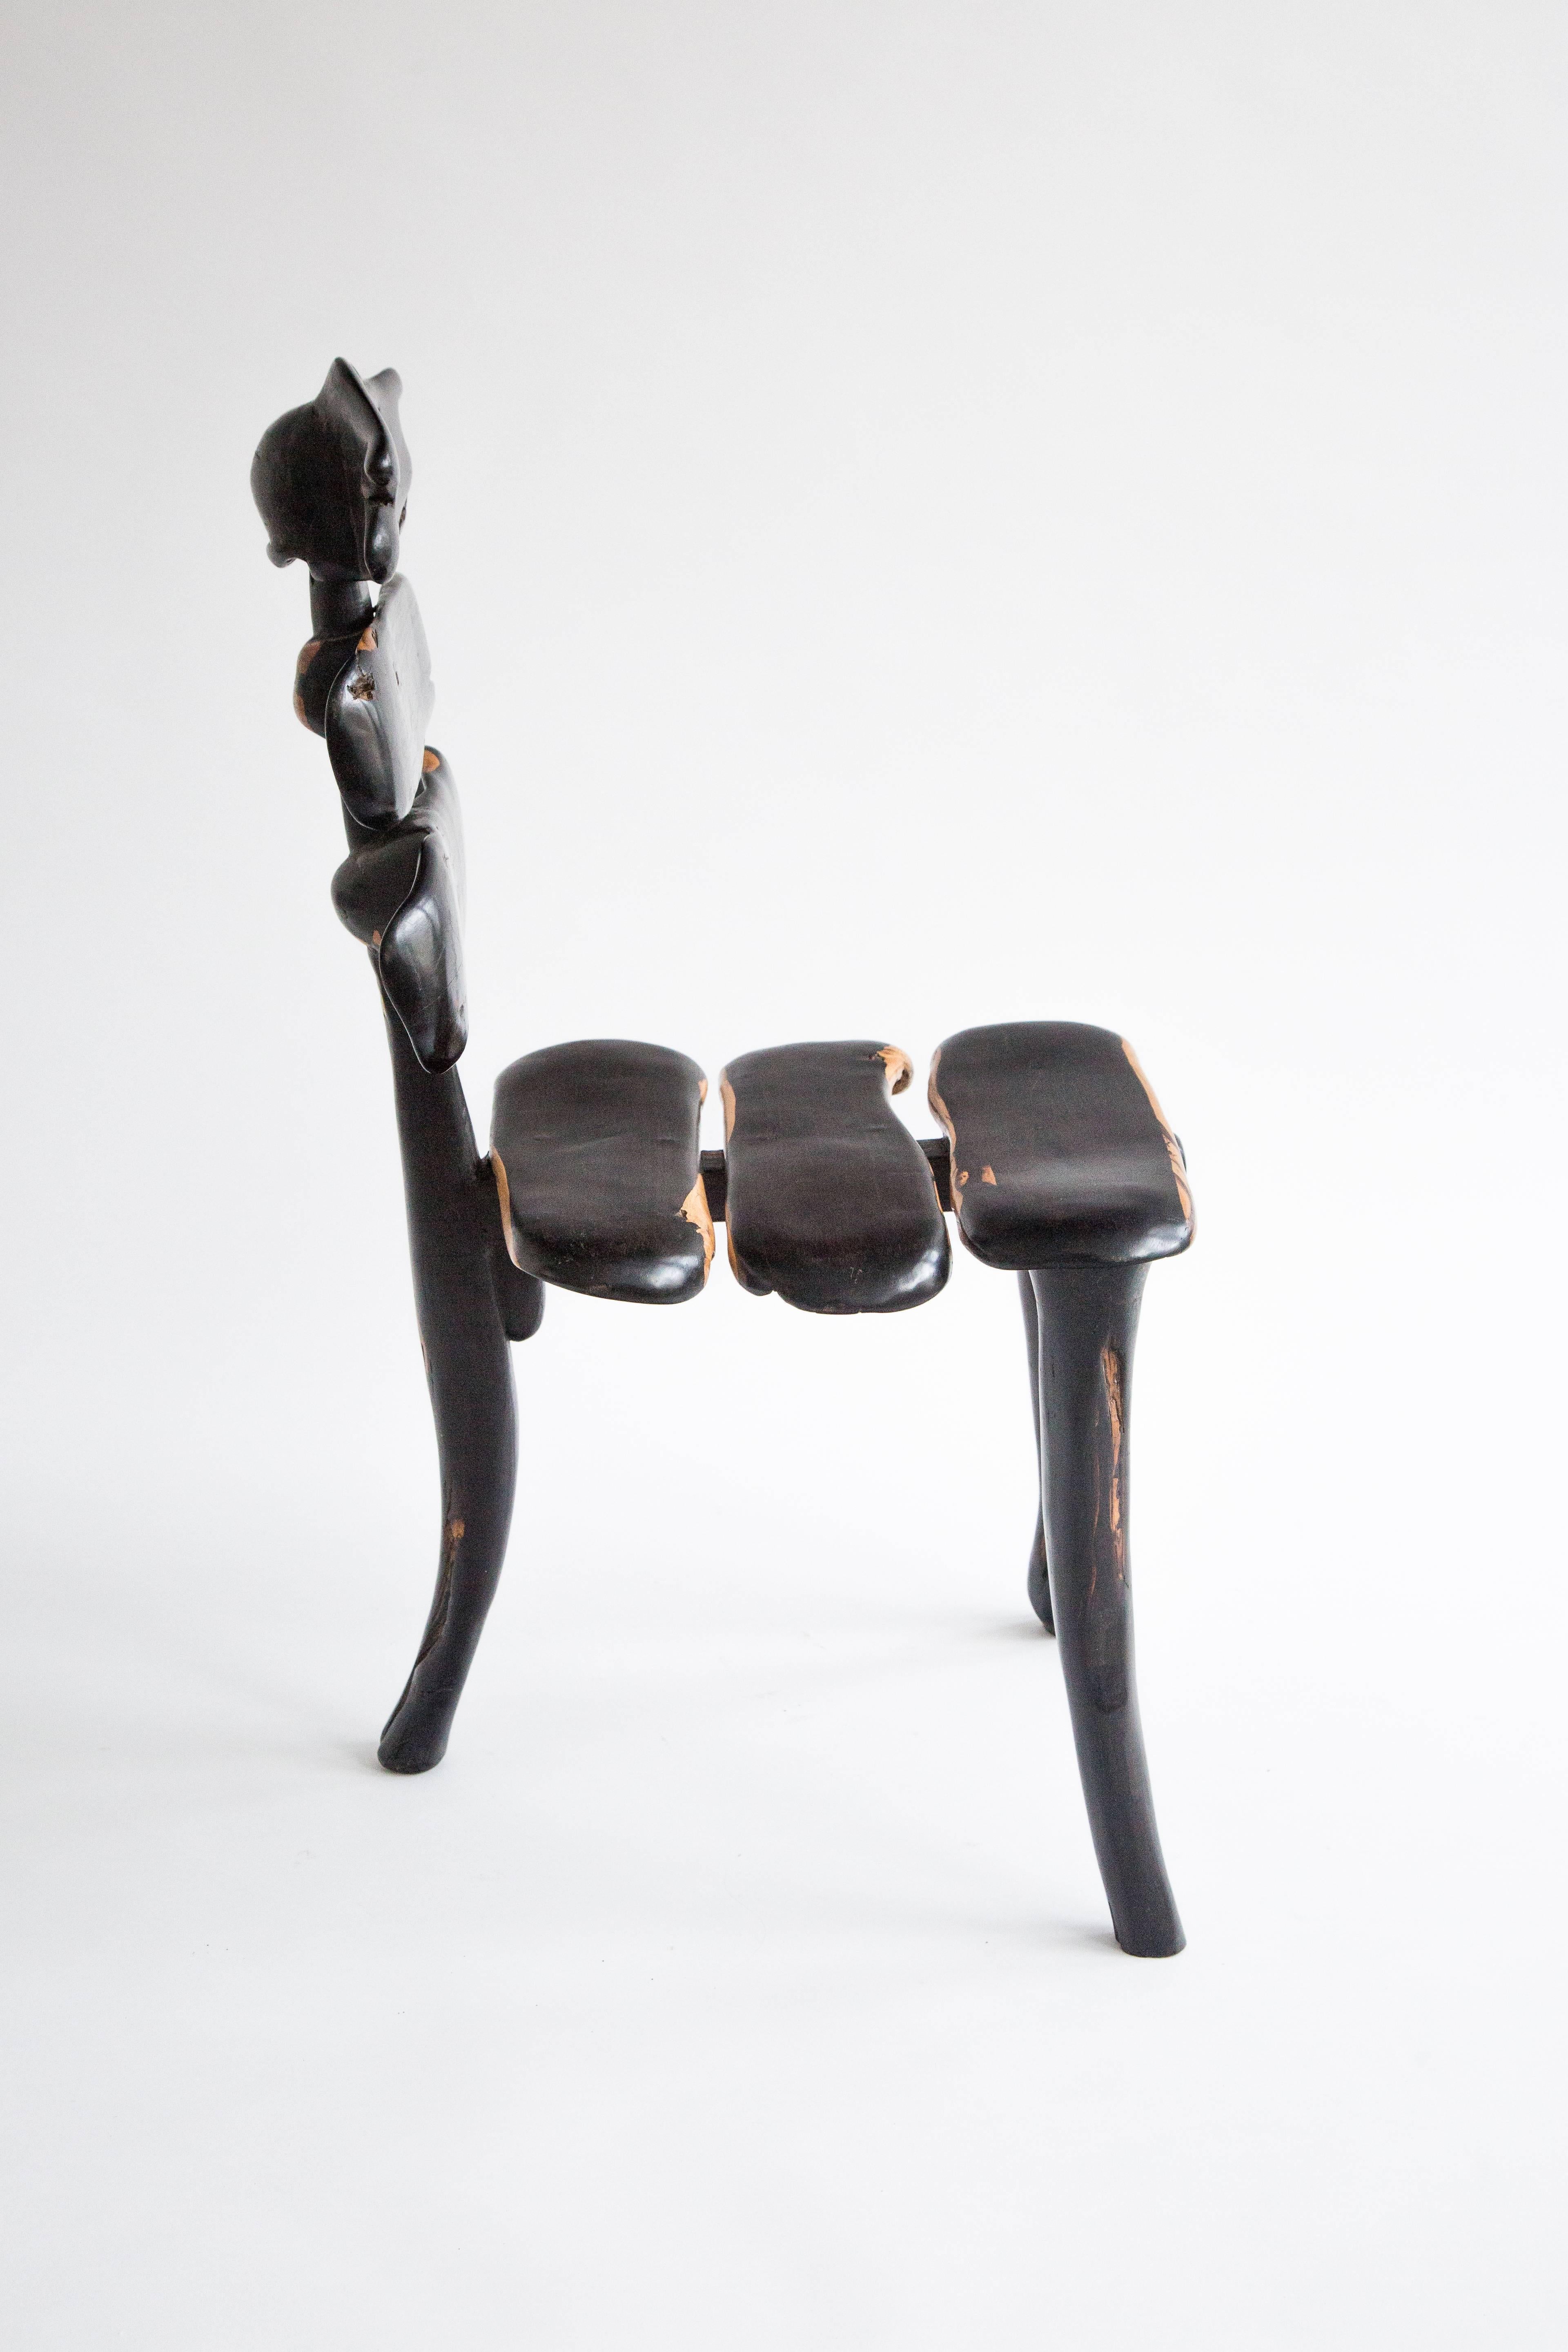 Vertebrae Chair - Brown Abstract Sculpture by Balla Niang